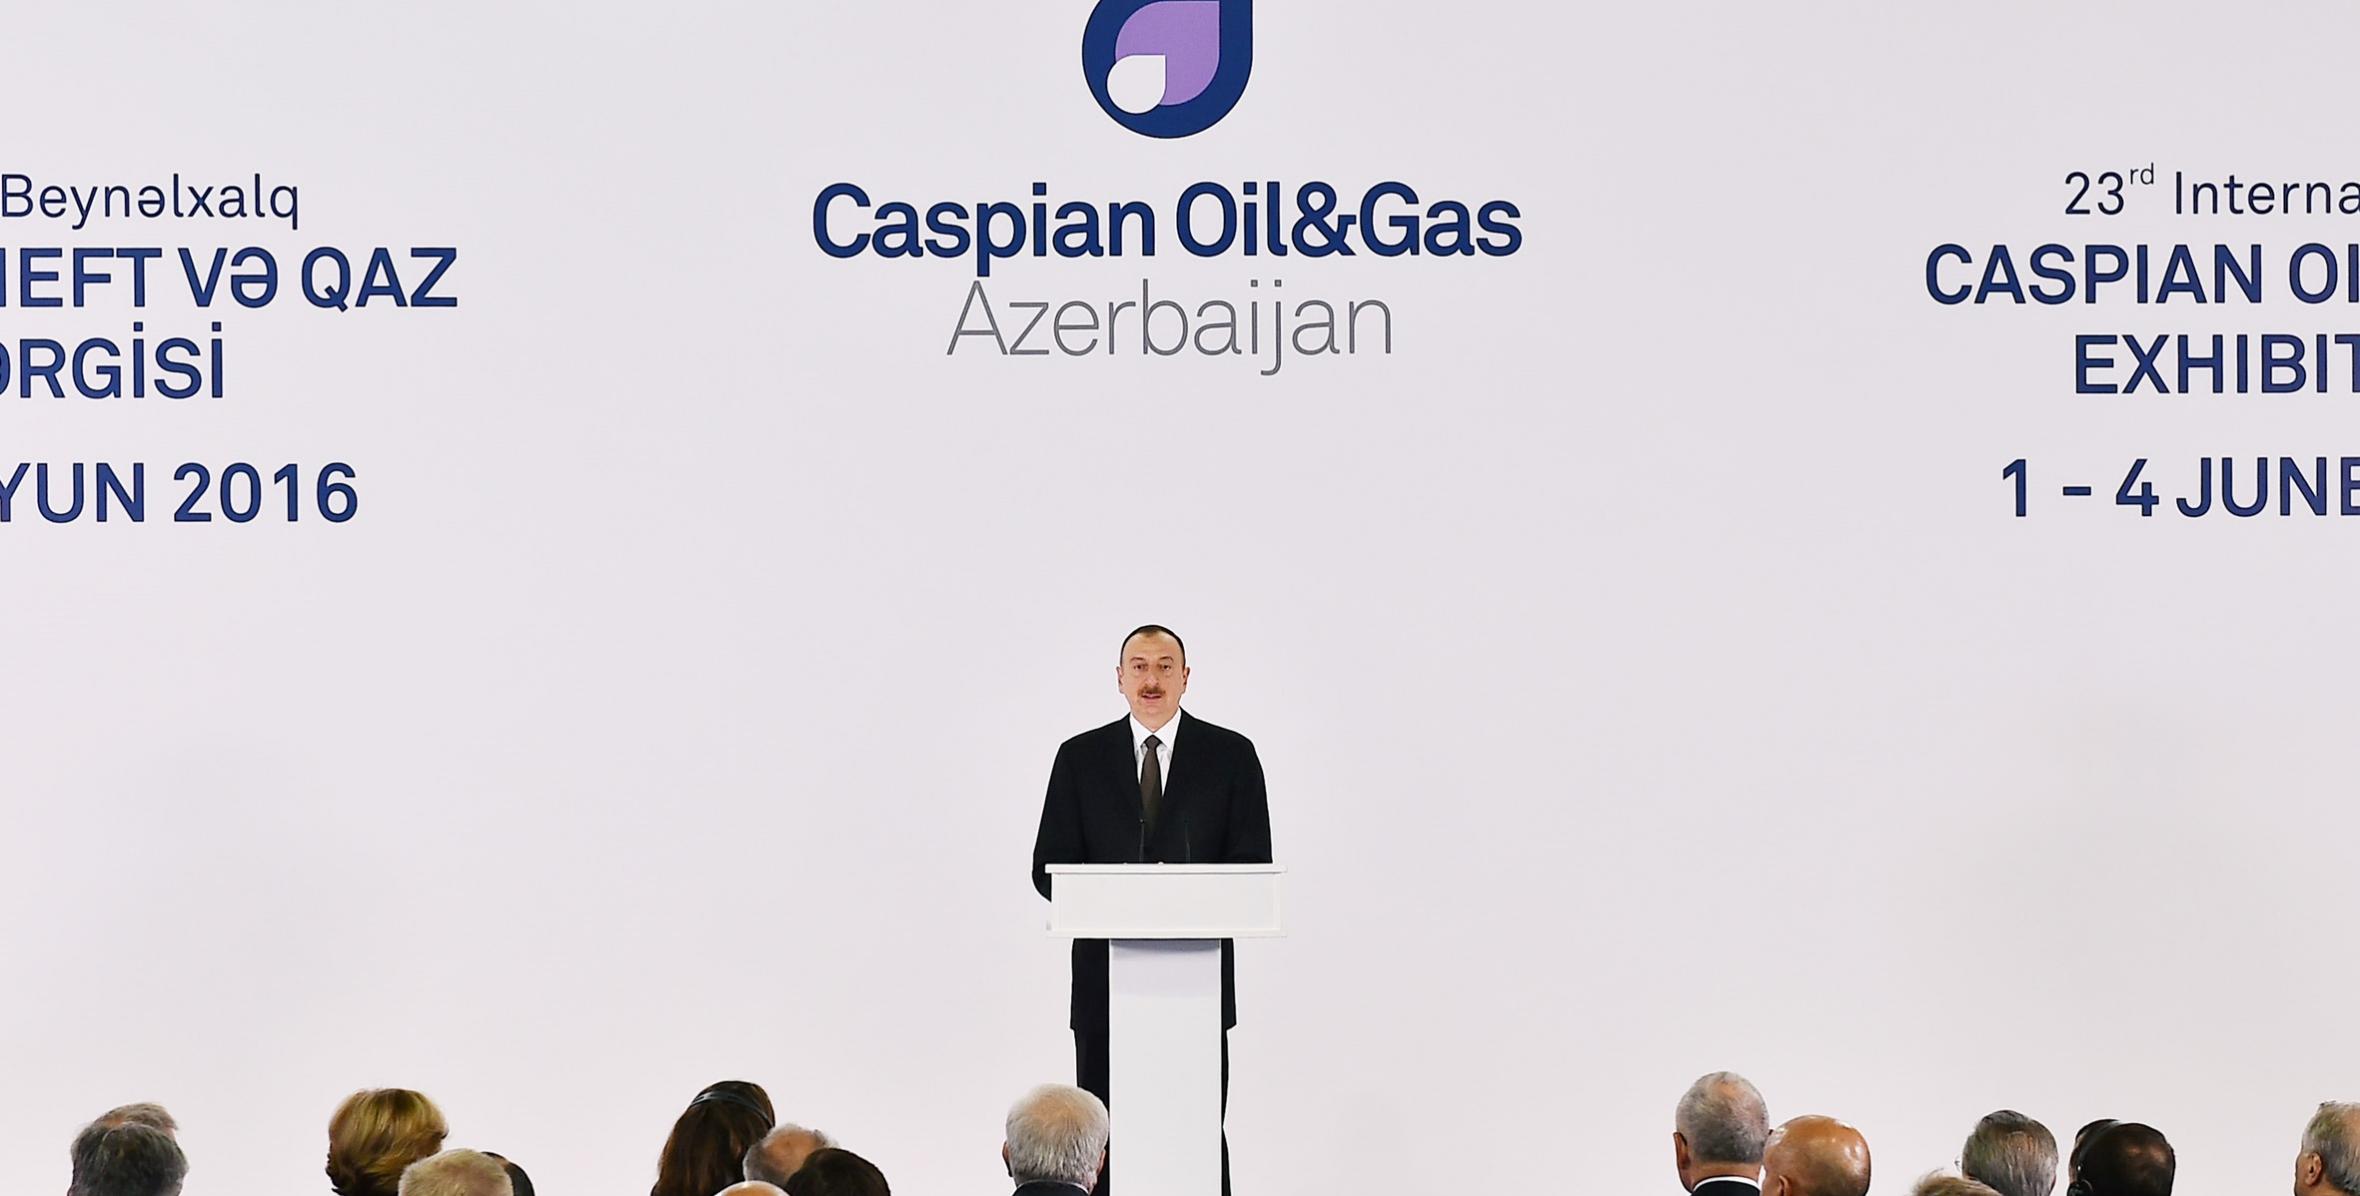 Speech by Ilham Aliyev at the opening of Caspian Oil & Gas exhibition 2016